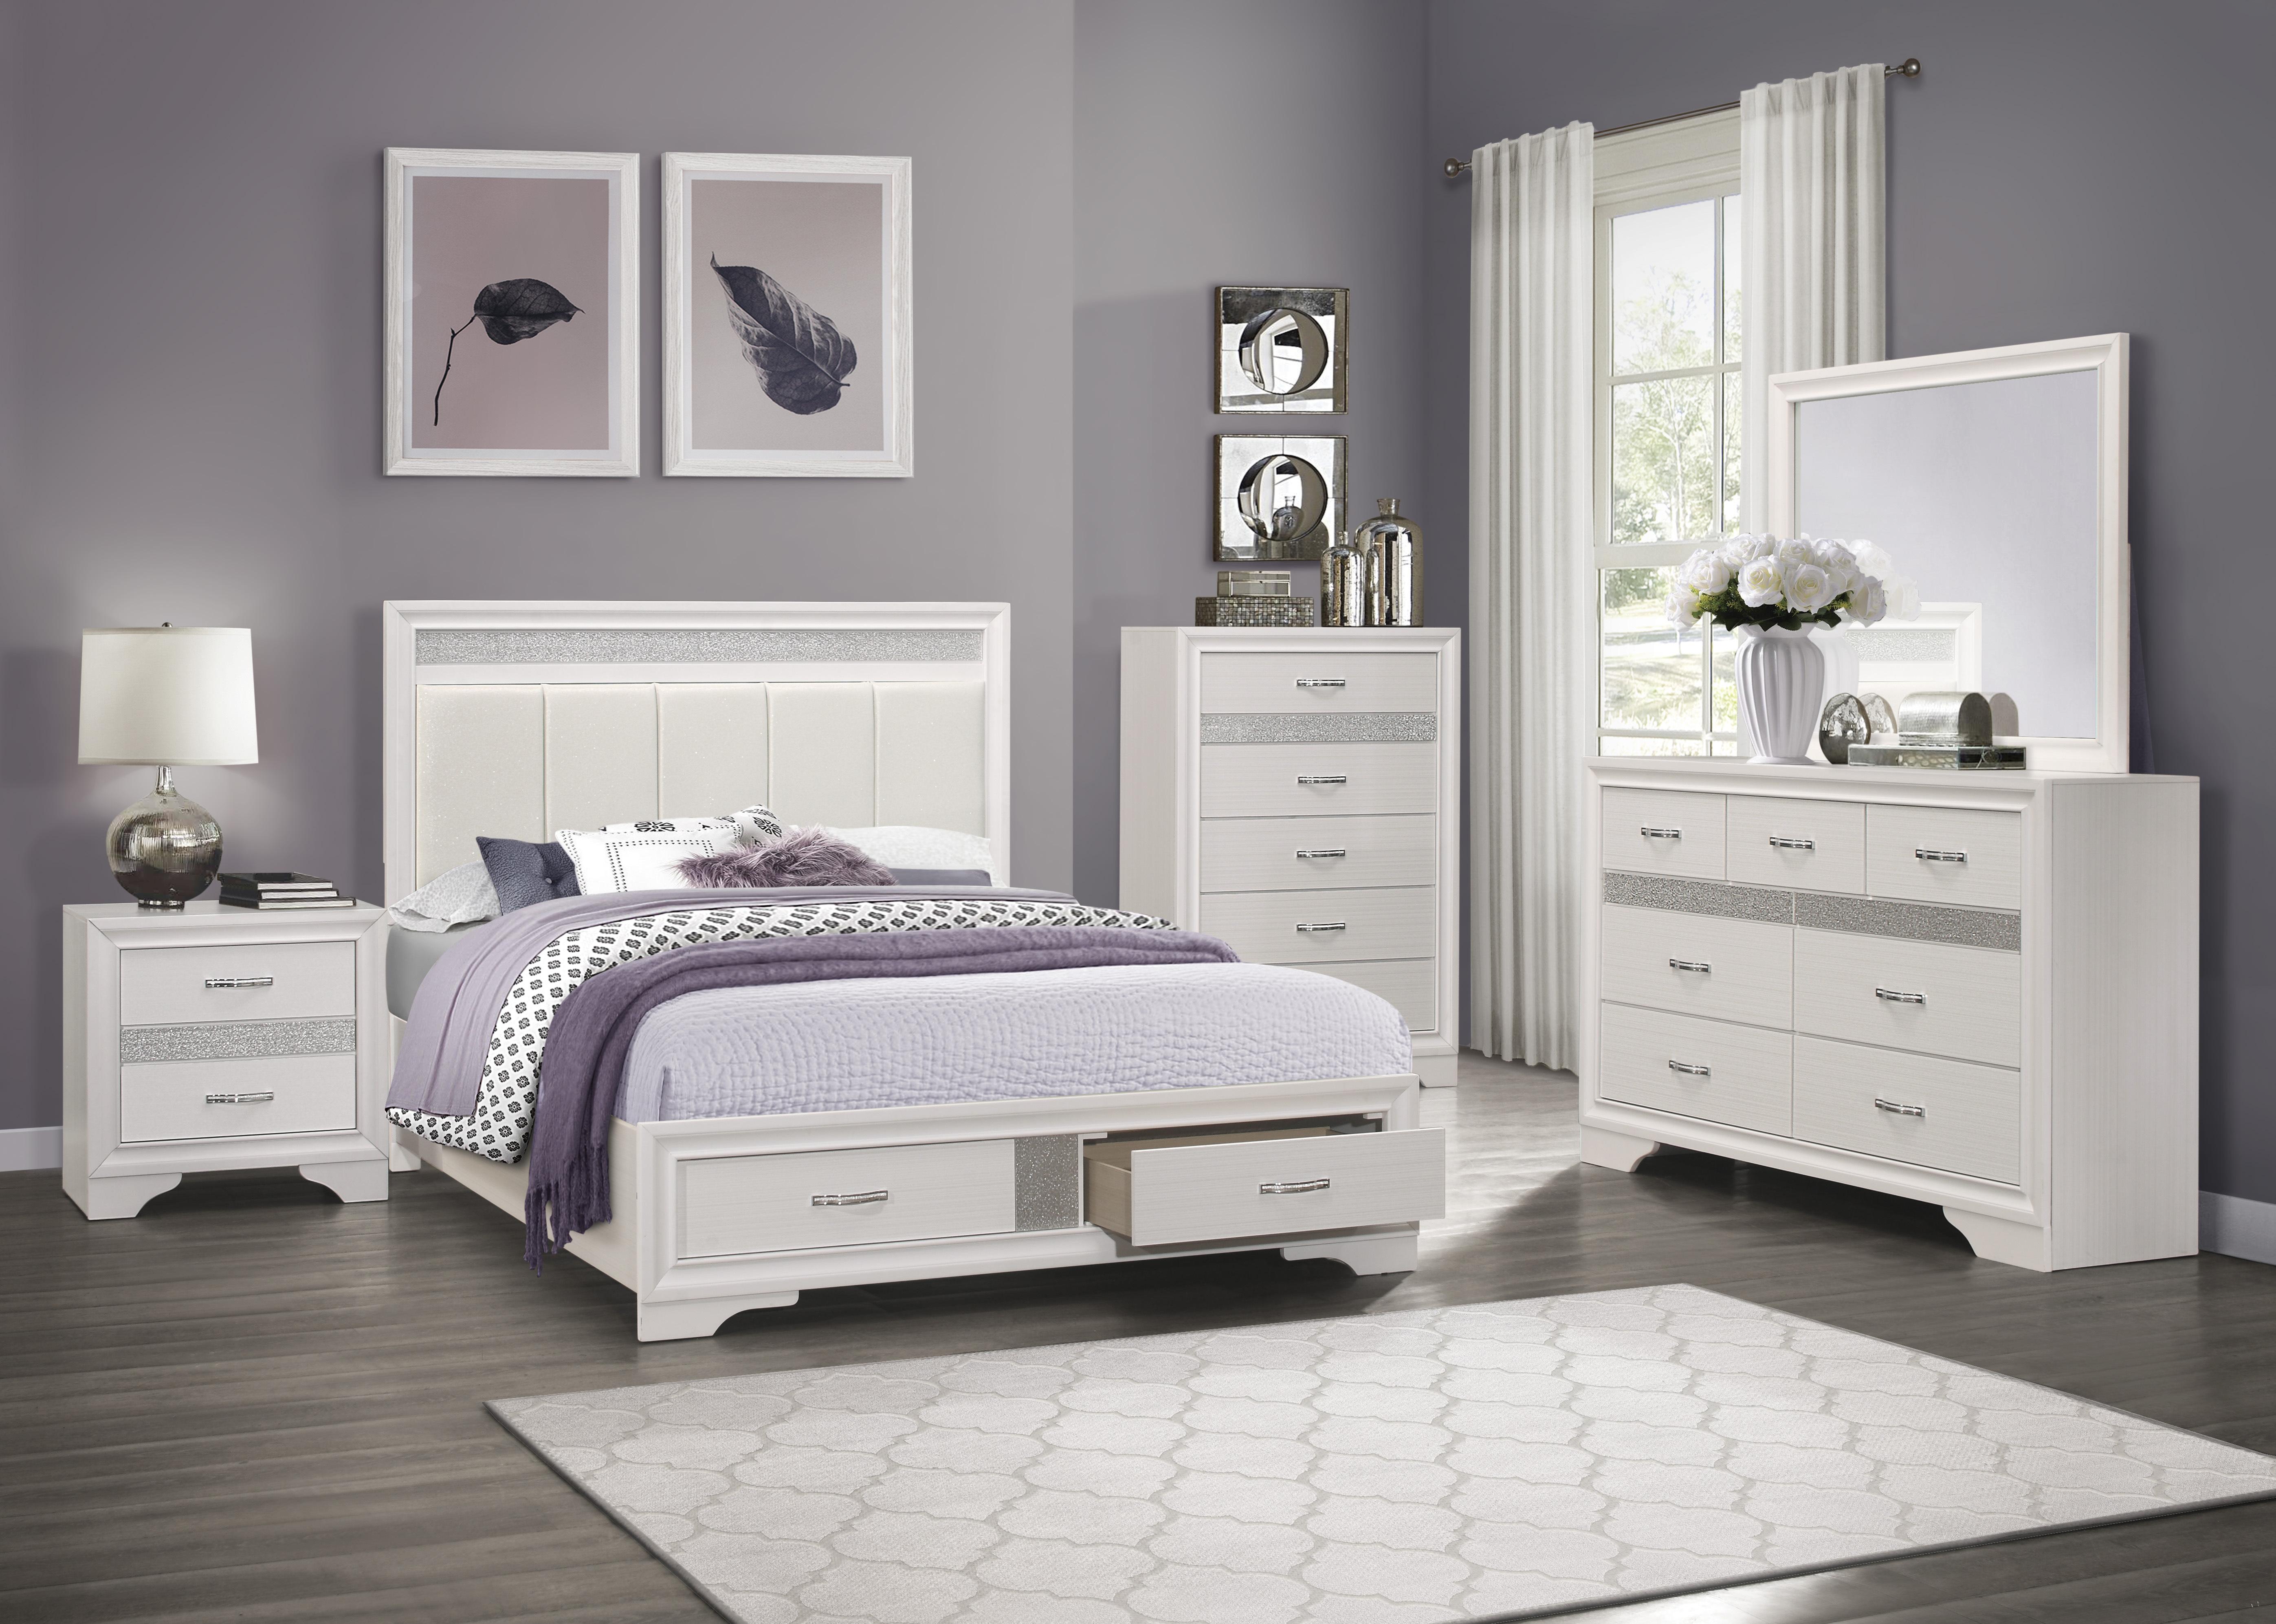 Modern Bedroom Set 1505WK-1CK-6PC Luster 1505WK-1CK-6PC in White Faux Leather